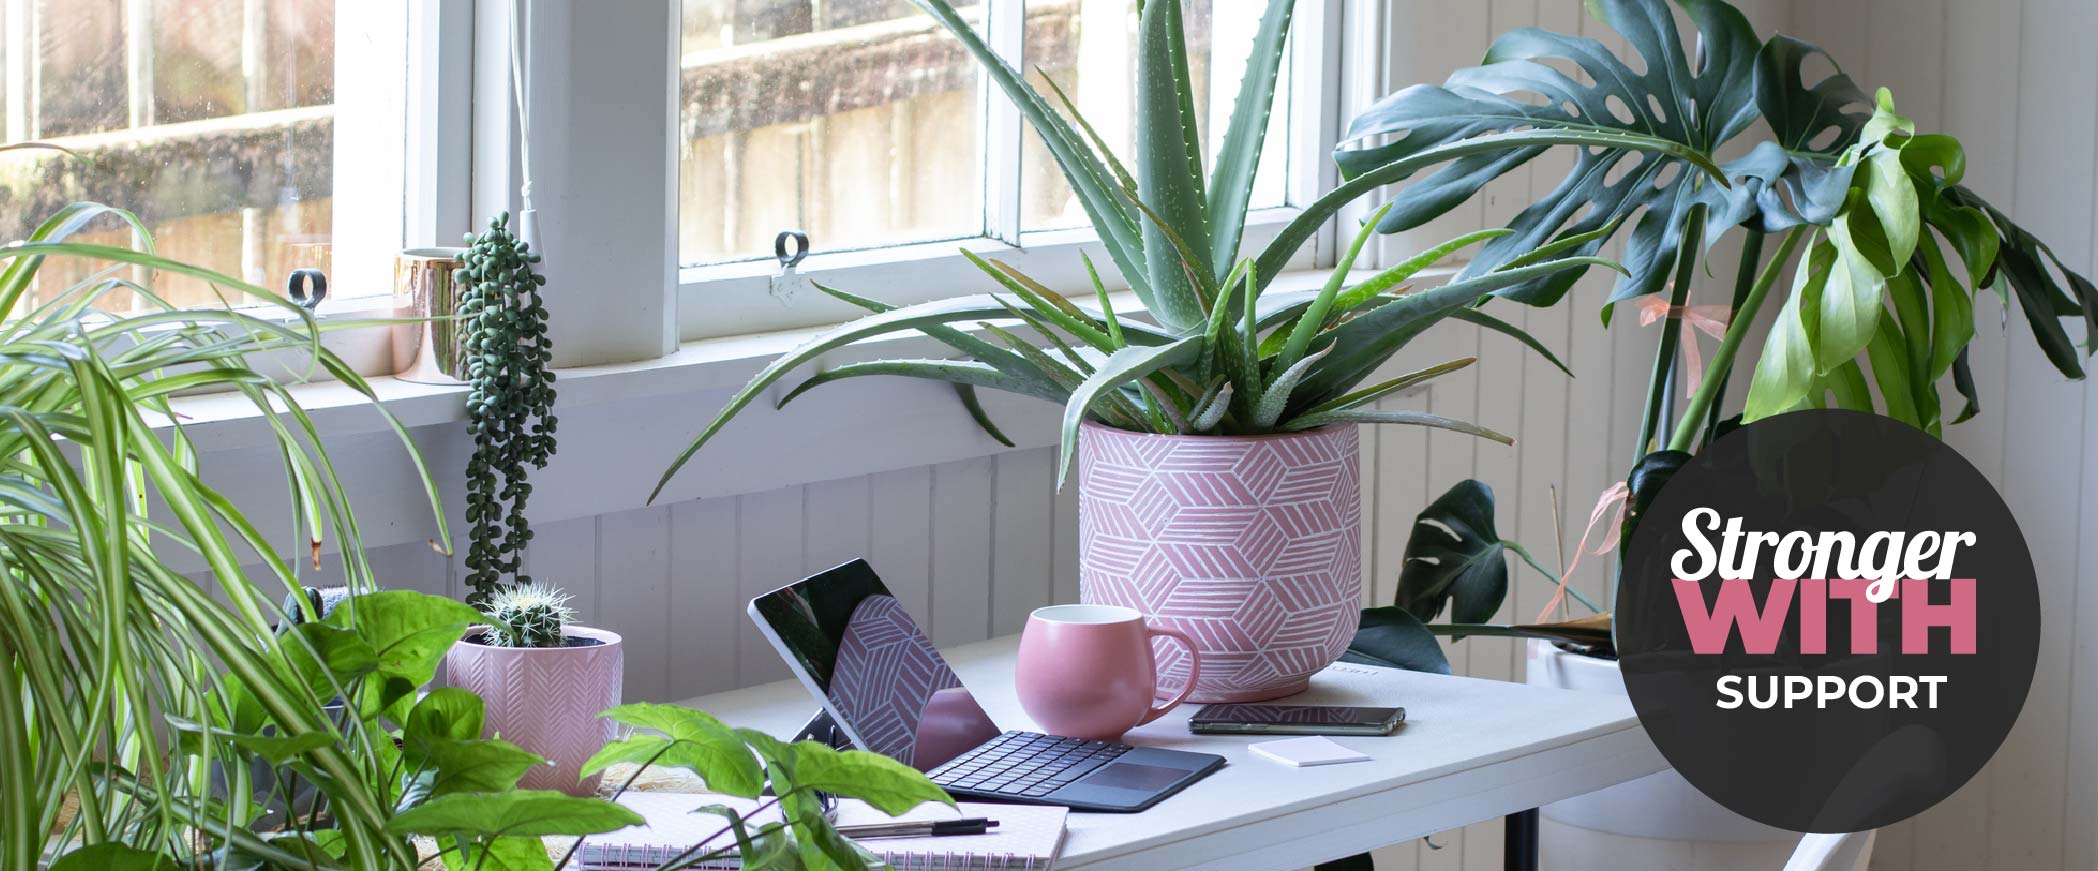 Laptop and some plants on a desk